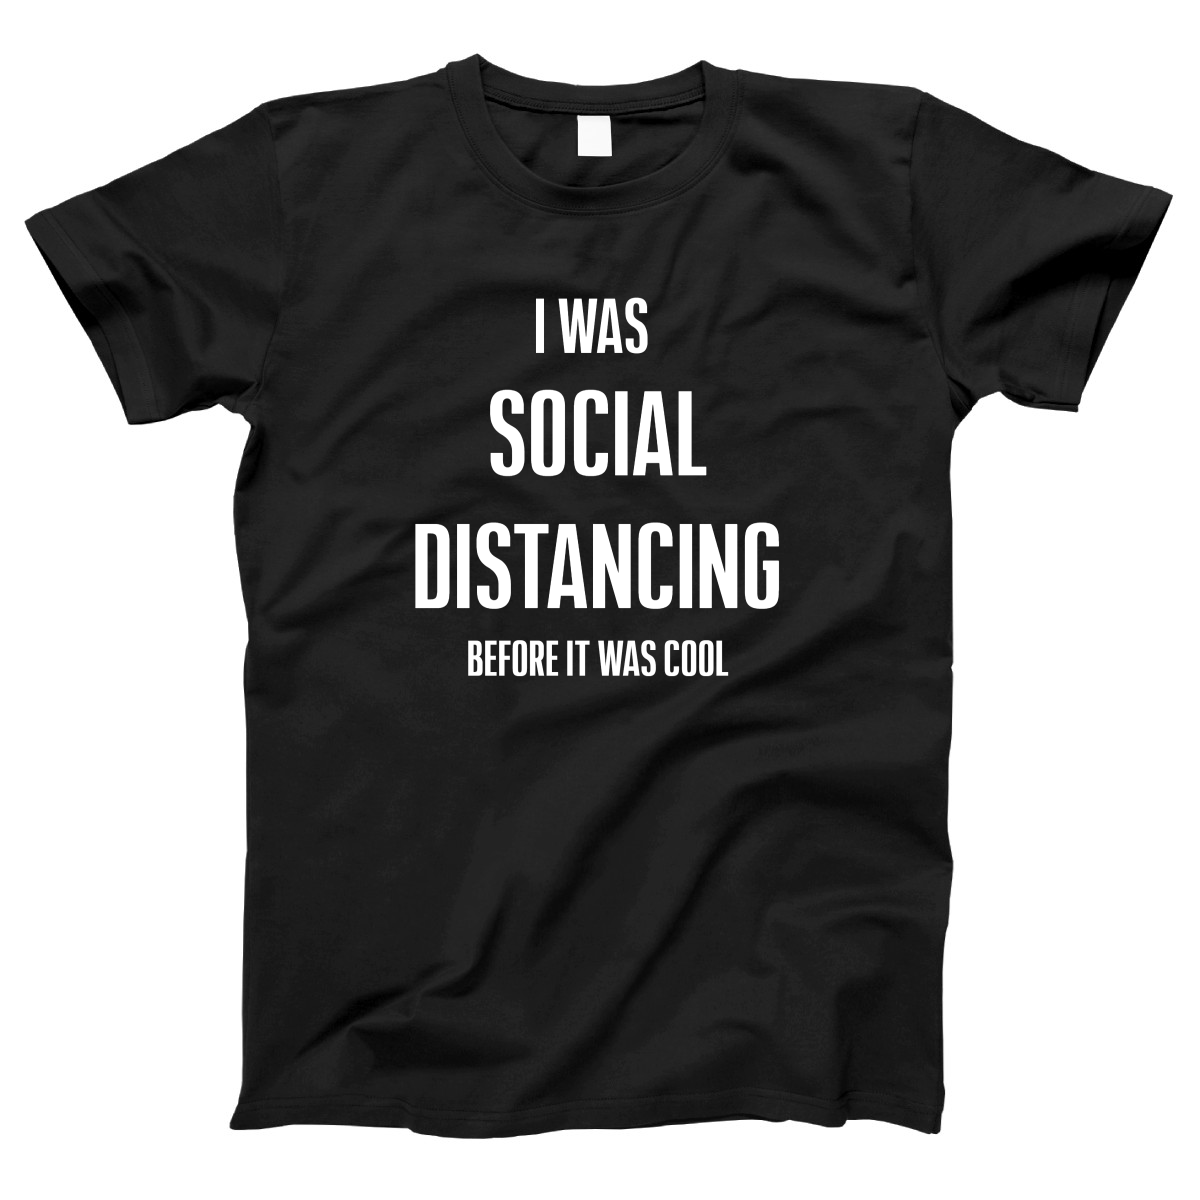 I was social distancing before it was cool Women's T-shirt | Black